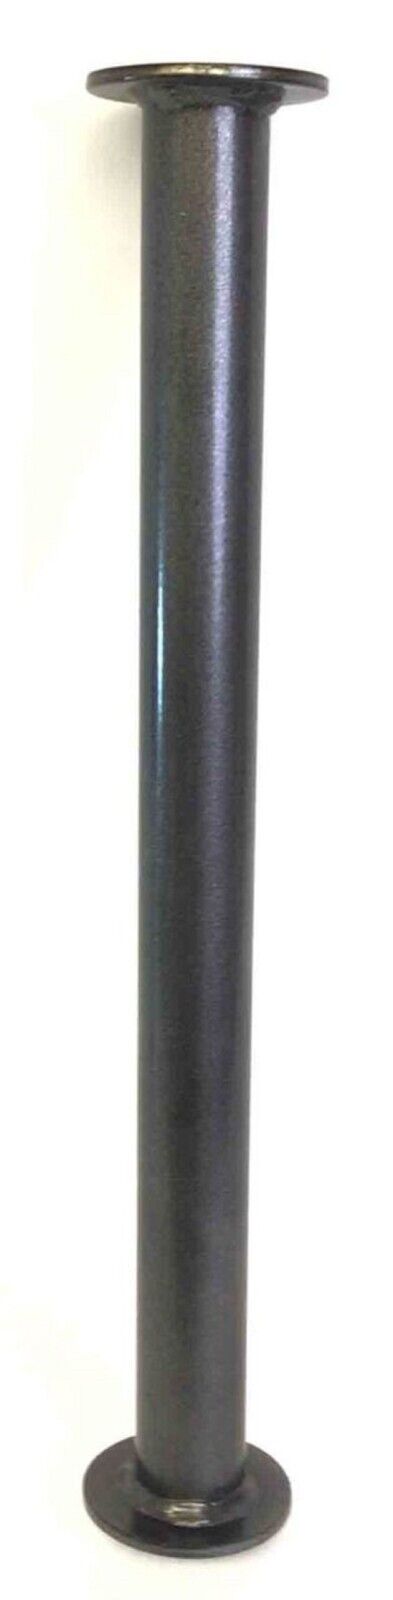 Powertec Strength System Guide Rod Weight Carriage Stop Limit WLTPL-GRWCSL - hydrafitnessparts